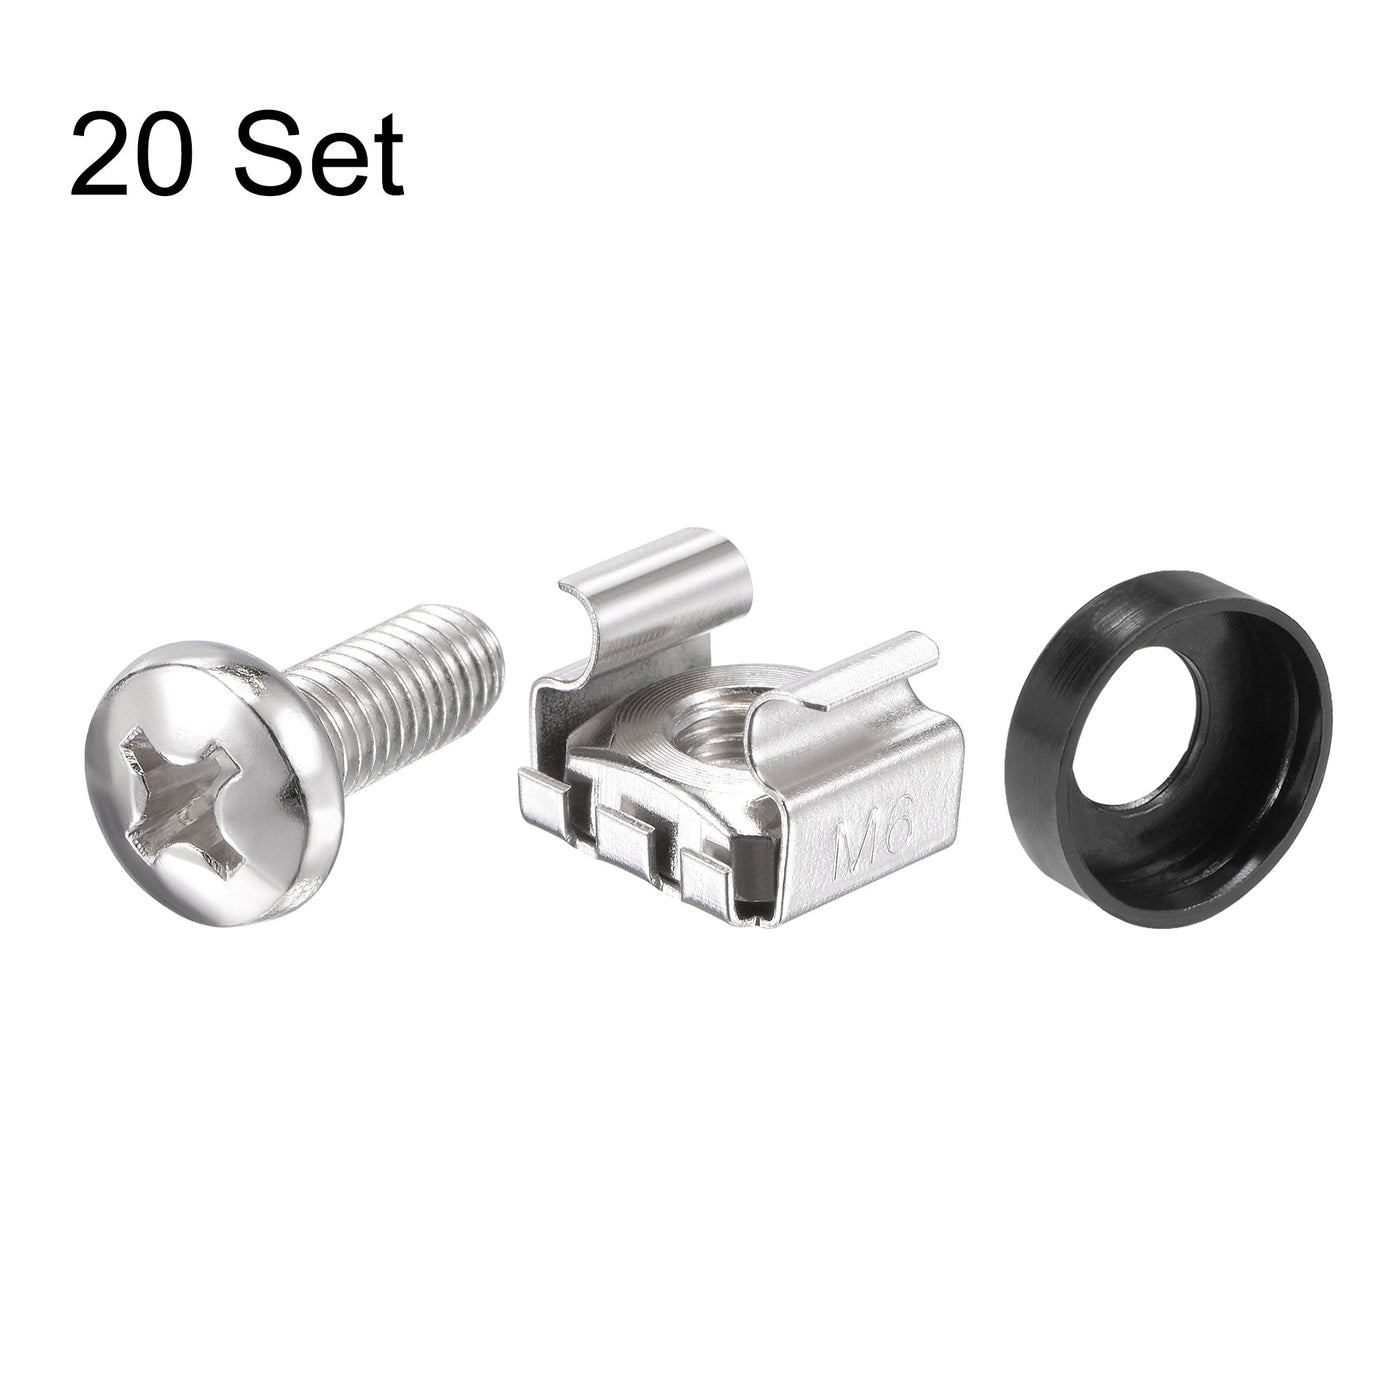 uxcell Uxcell M6x16mm Server Rack Cage Nuts Silver Tone 20Set, Mounting Screws for Server Shelves